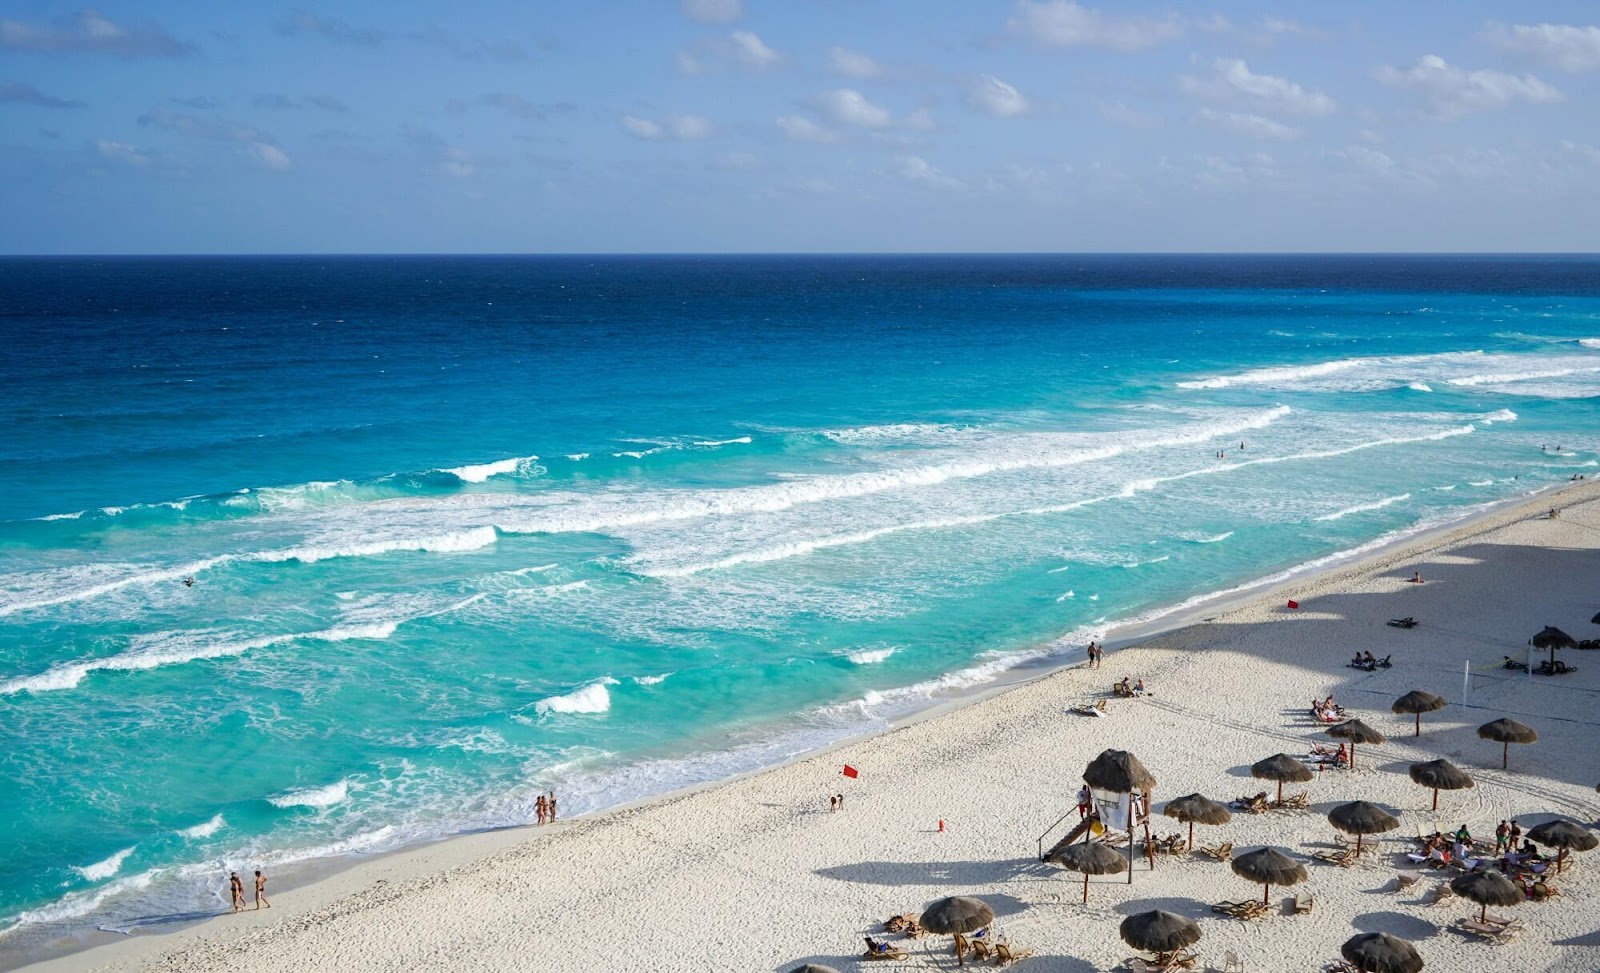 The Ultimate Guide to Dining in the Cancun Hotel Zone